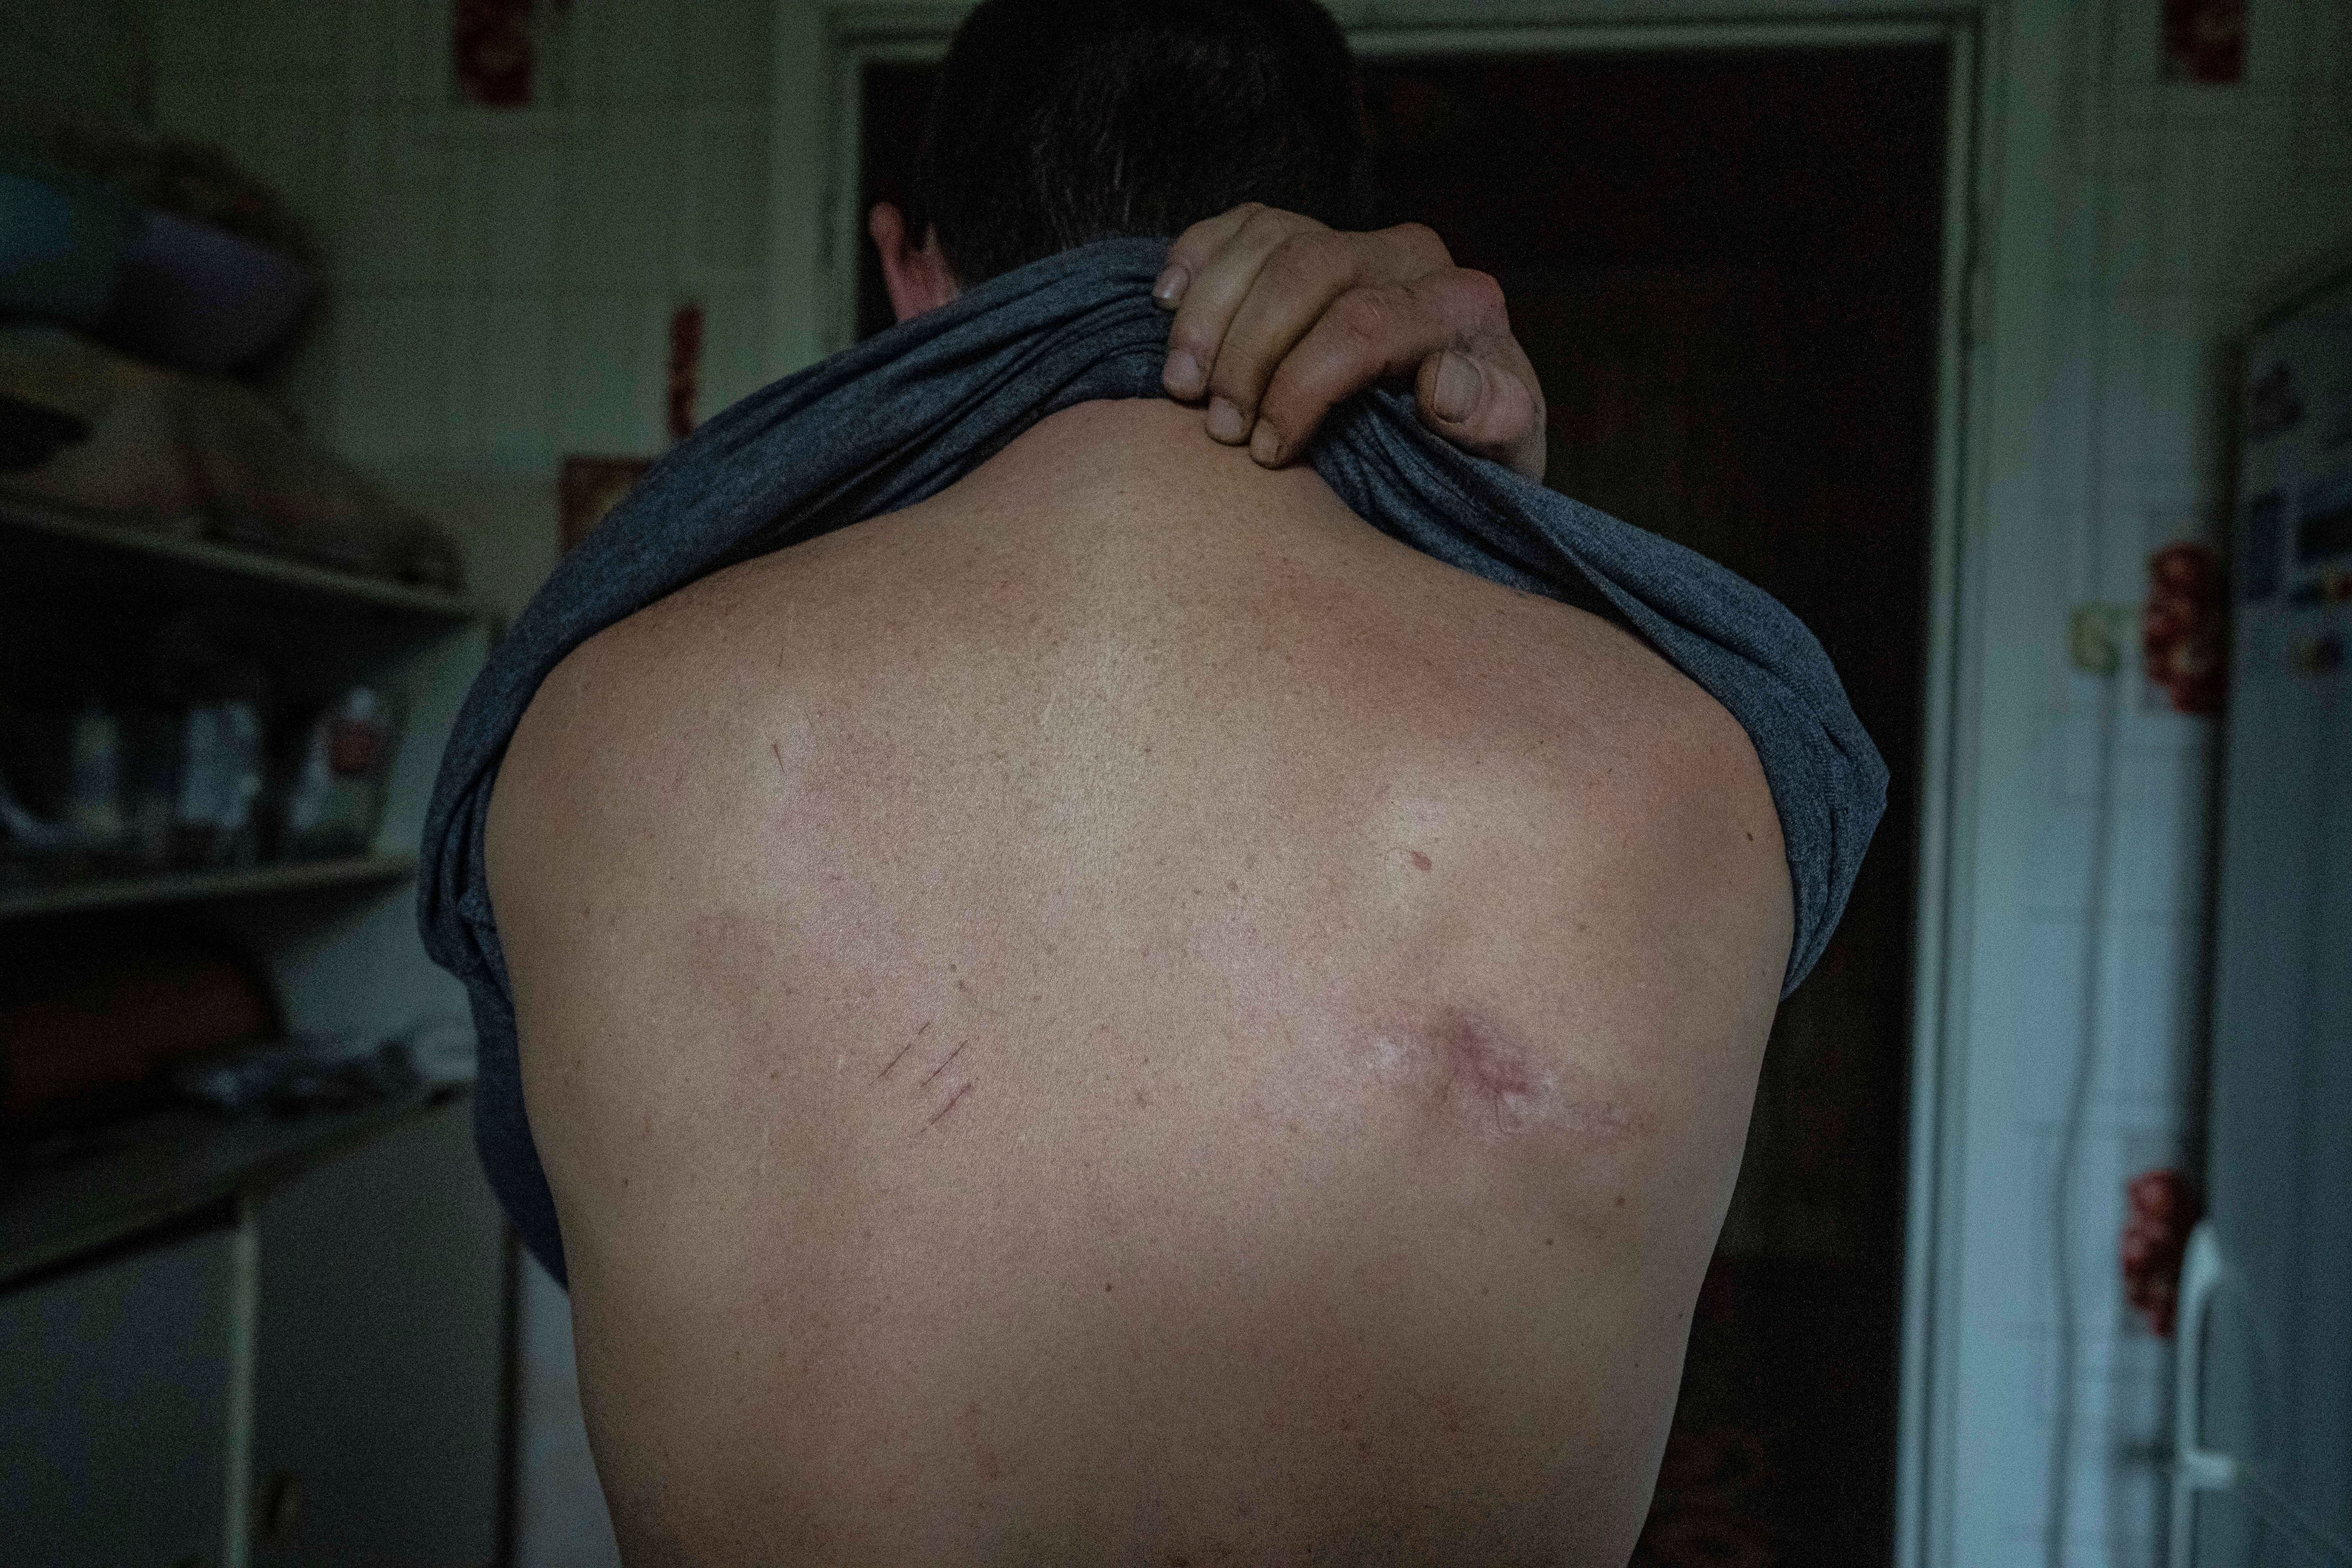 Mykola Mosyakyn shows scars on his back after torture by Russian soldiers